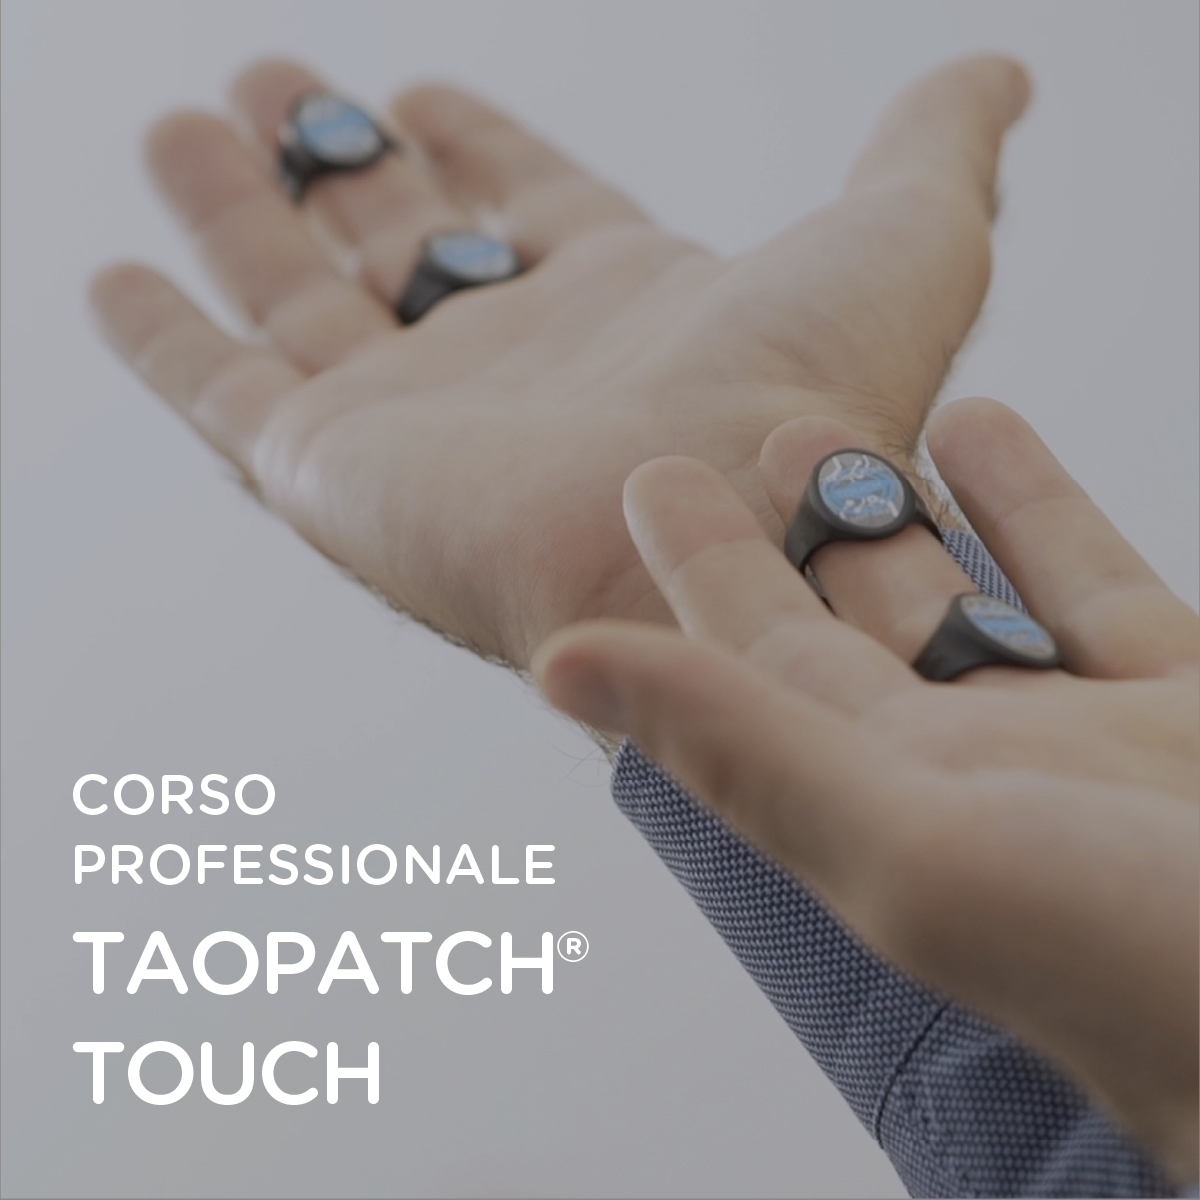 Taopatch touch